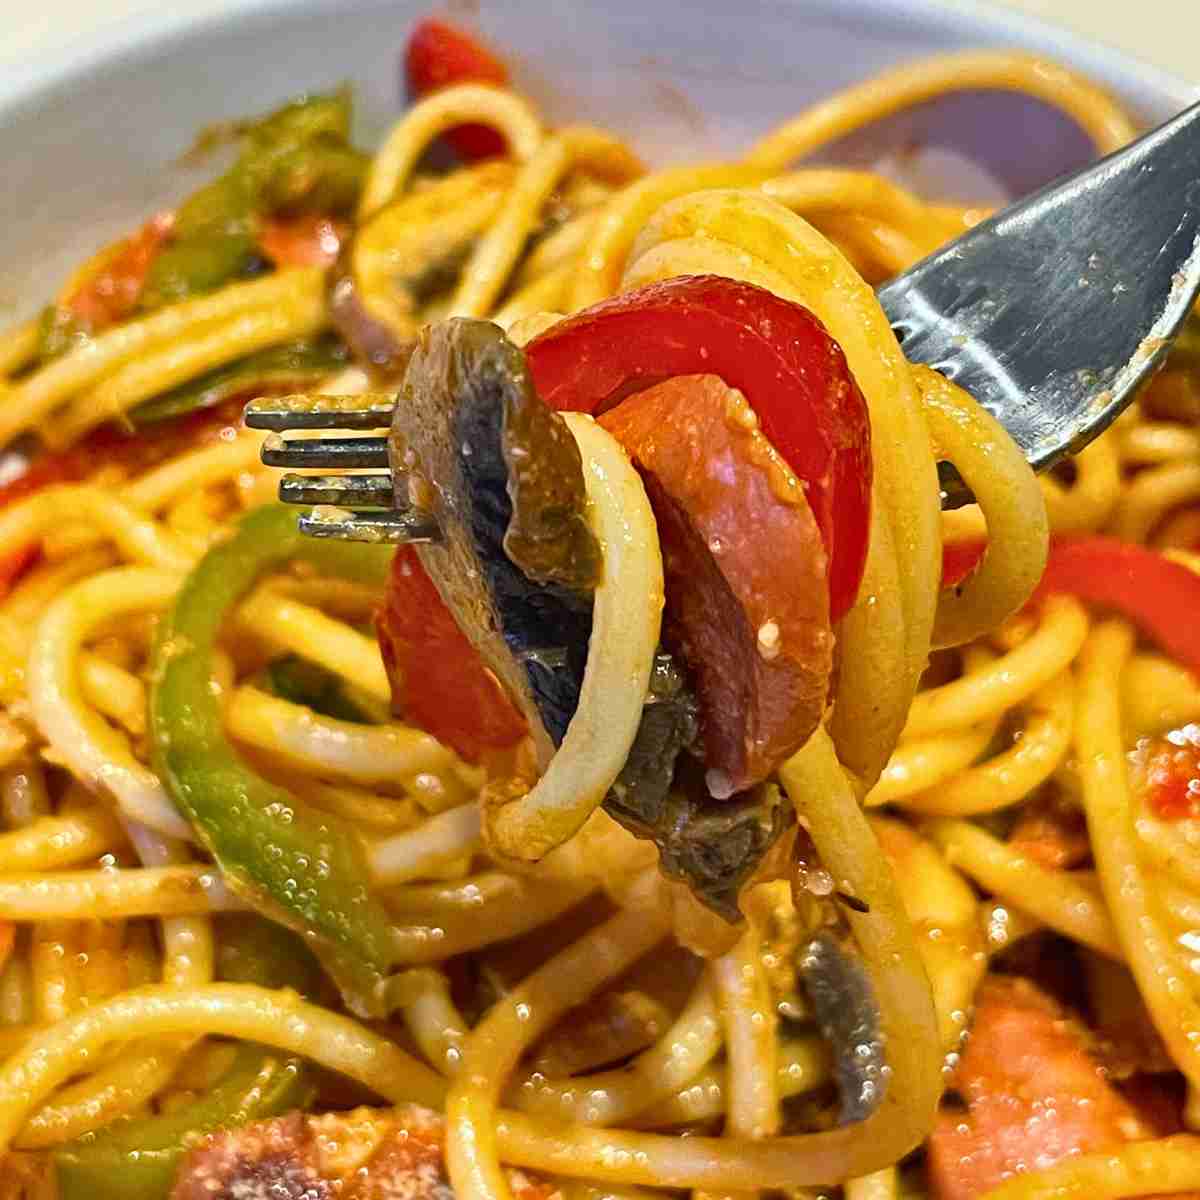 ketchup spaghetti mushrooms and peppers